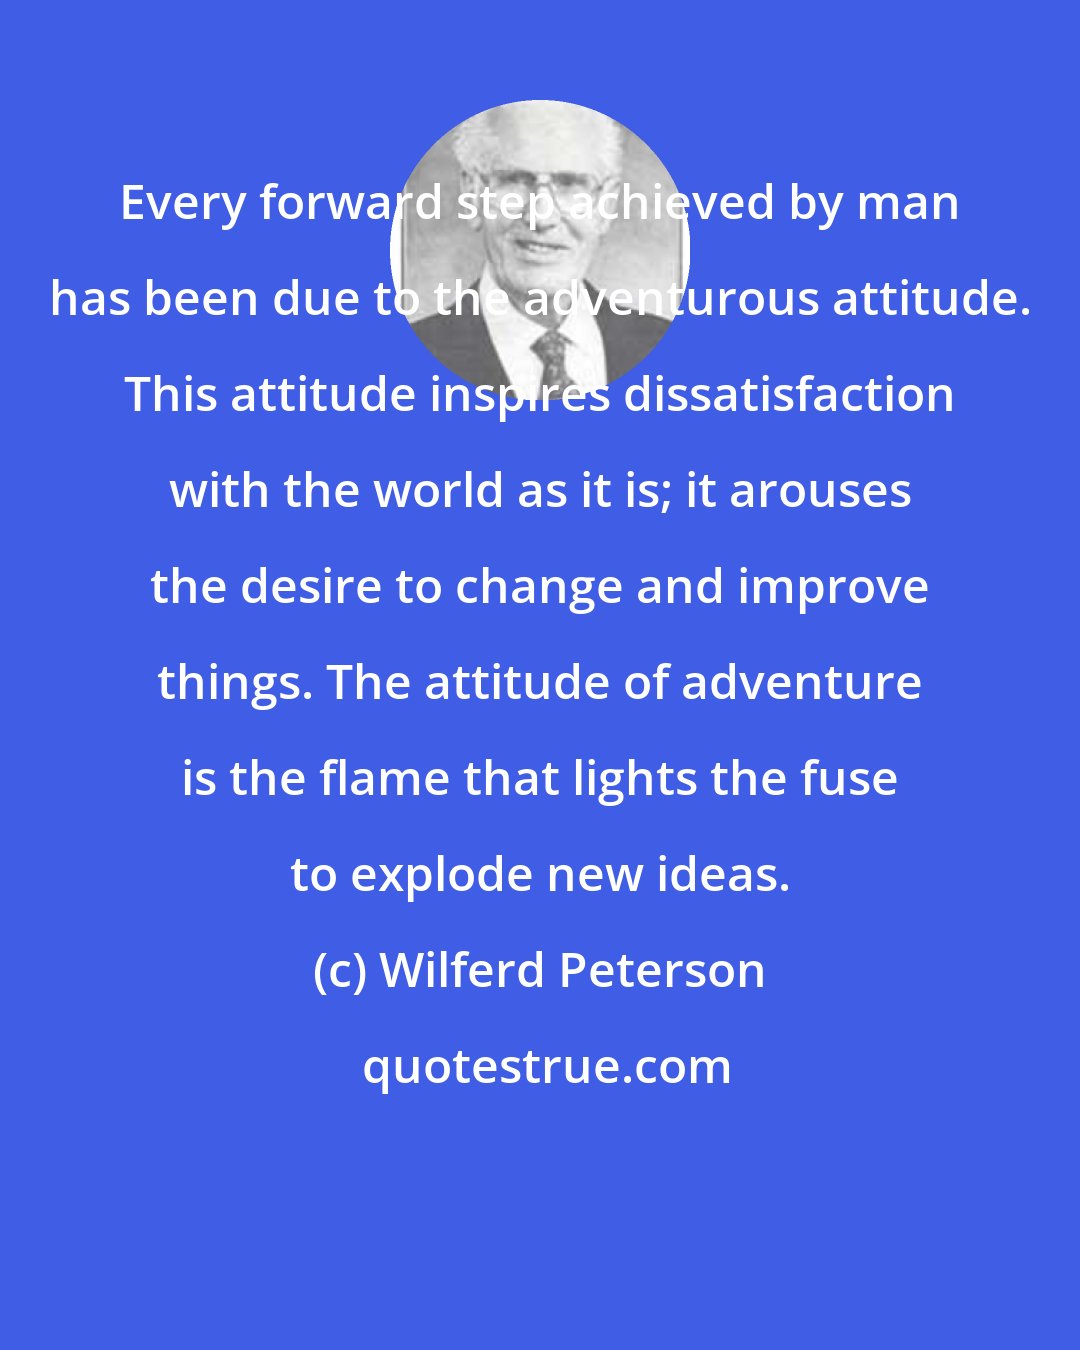 Wilferd Peterson: Every forward step achieved by man has been due to the adventurous attitude. This attitude inspires dissatisfaction with the world as it is; it arouses the desire to change and improve things. The attitude of adventure is the flame that lights the fuse to explode new ideas.